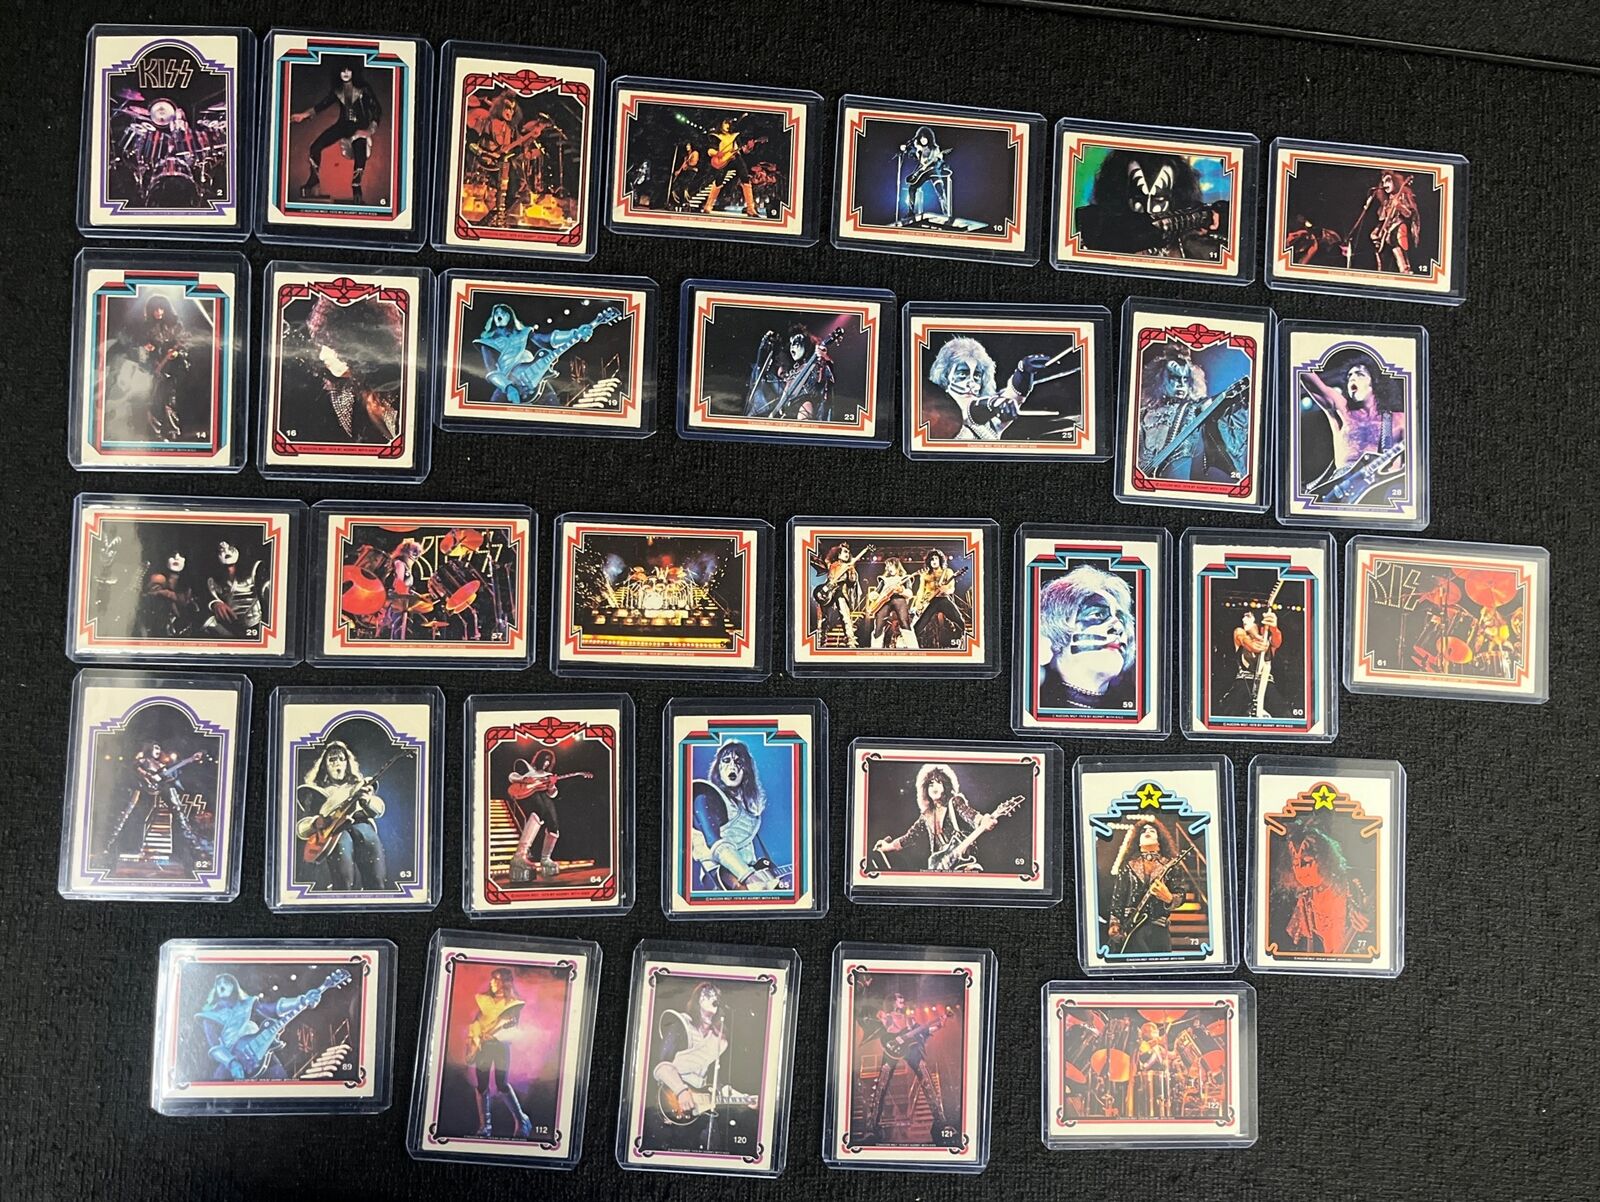 KISS LOT of 30 Trading Cards 1978 Gene Simmons Paul Stanley Ace Frehley Criss